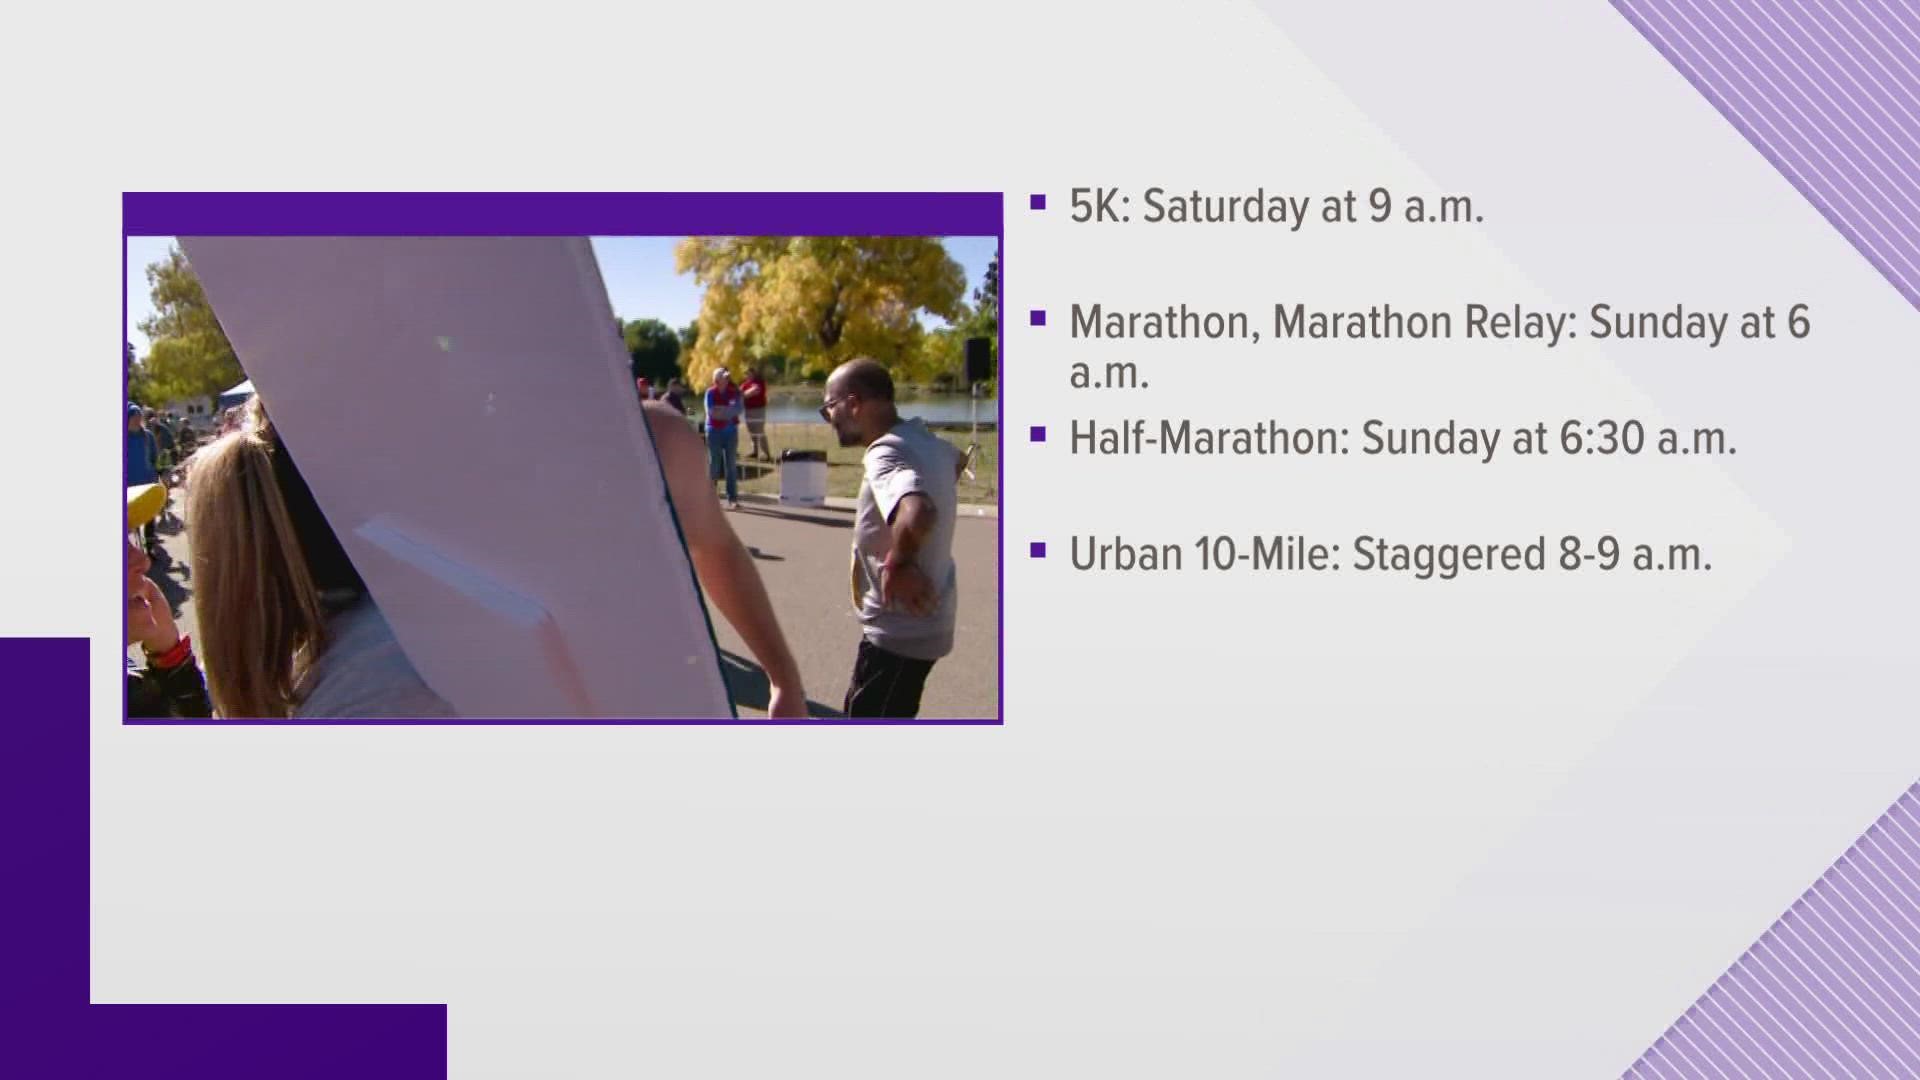 The race will cause road closures in the Denver/Lakewood area on Saturday and Sunday.